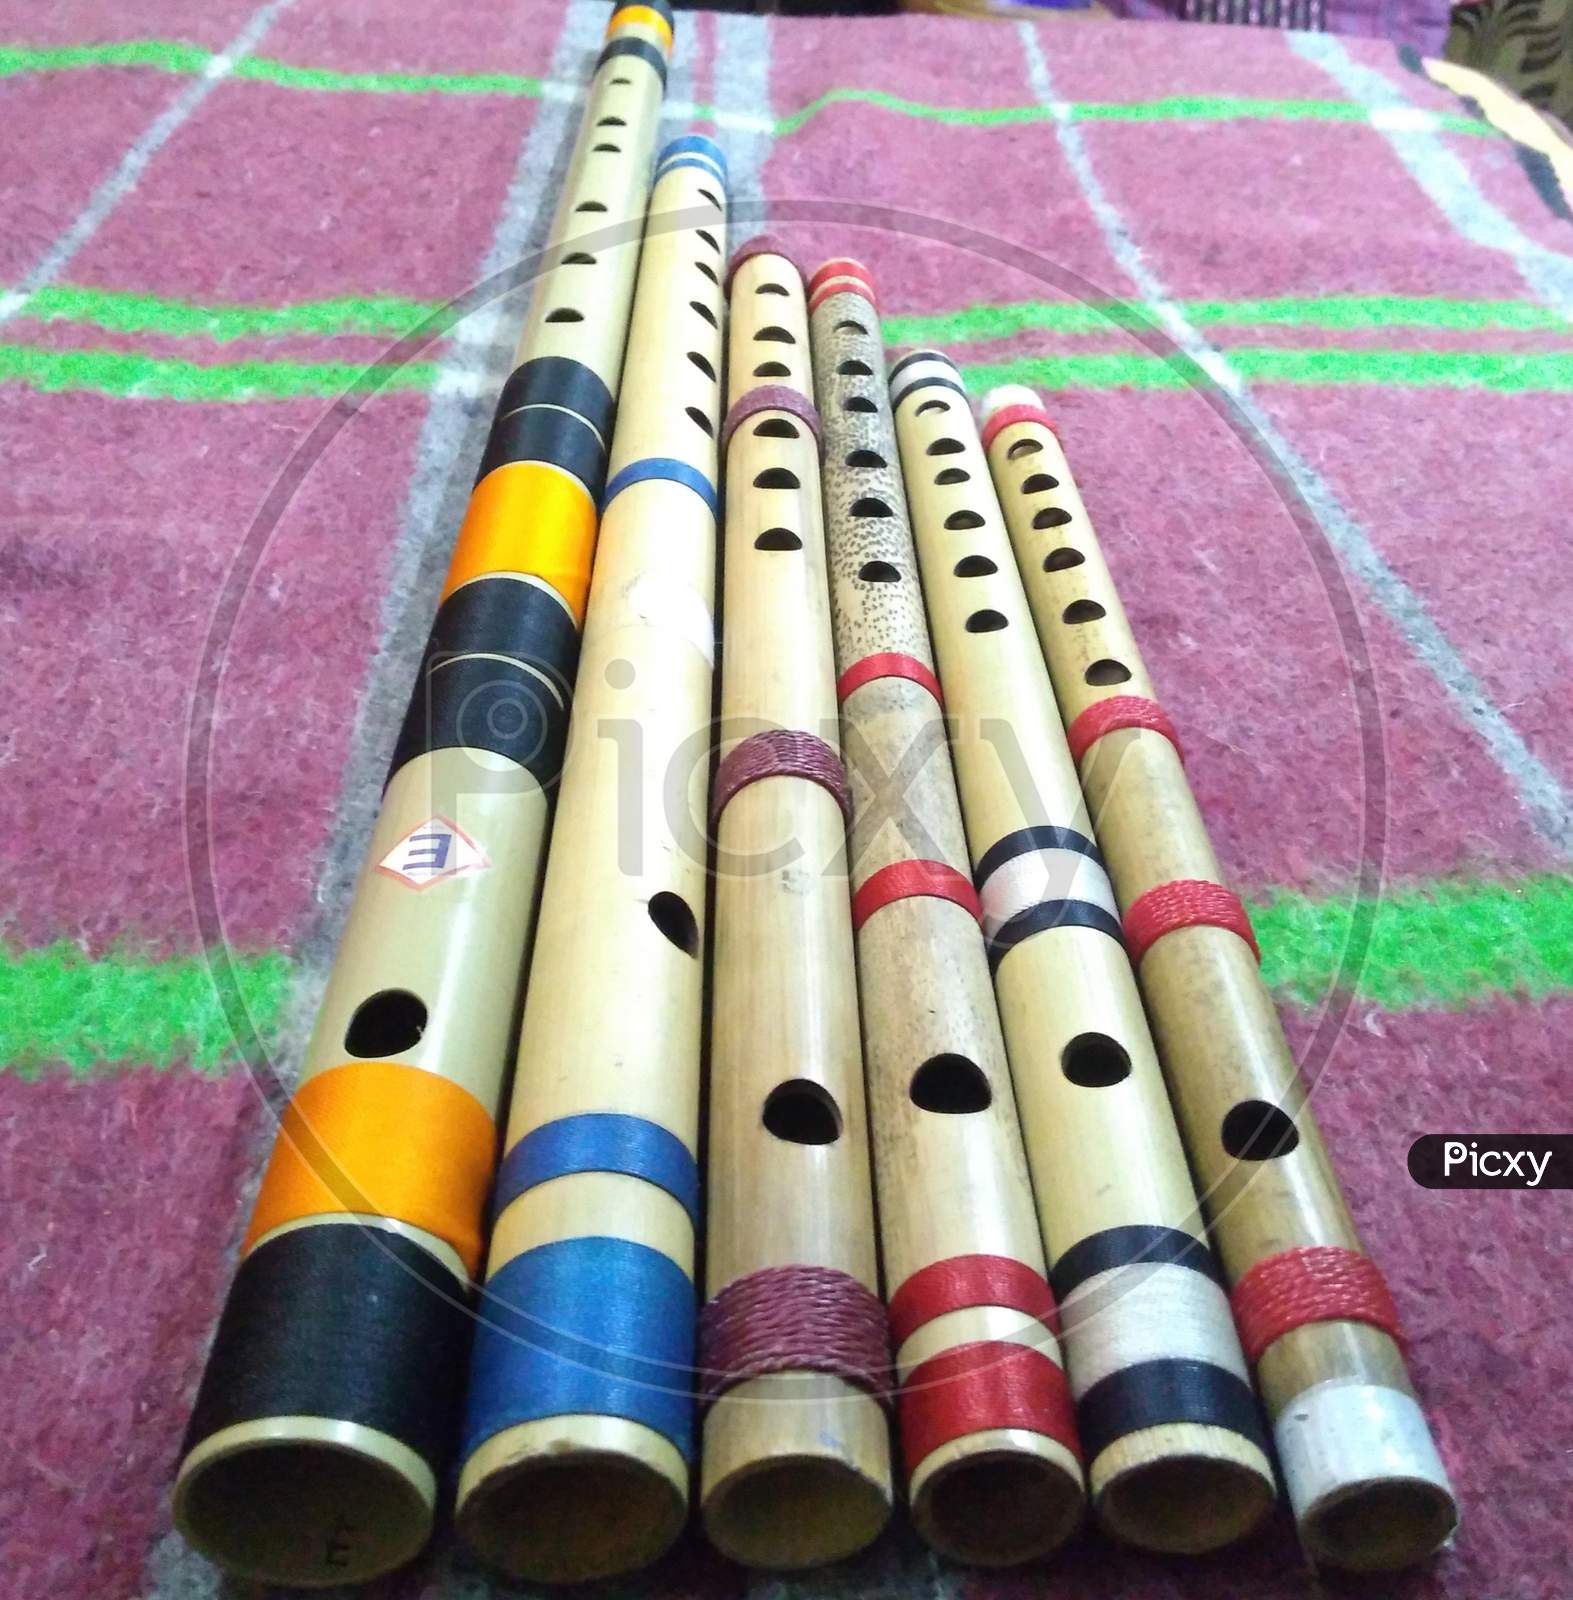 6 bamboo flutes also called Indian Bansuri of different scales in one picture fram